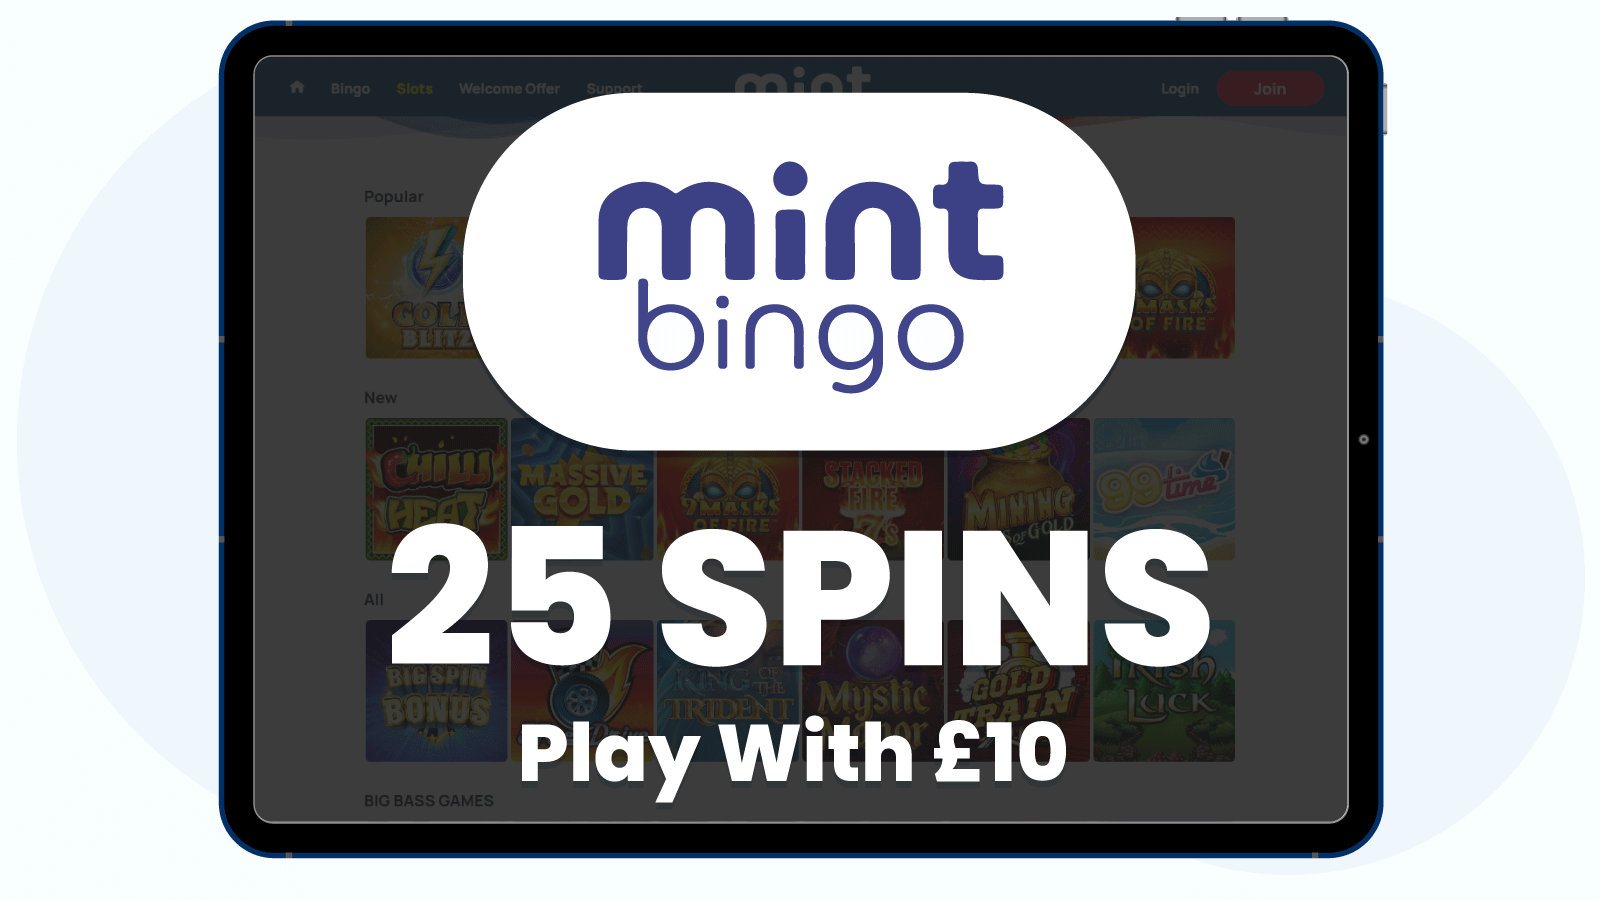 Deposit £5 play with £10 + 25 spins at Mint Bingo